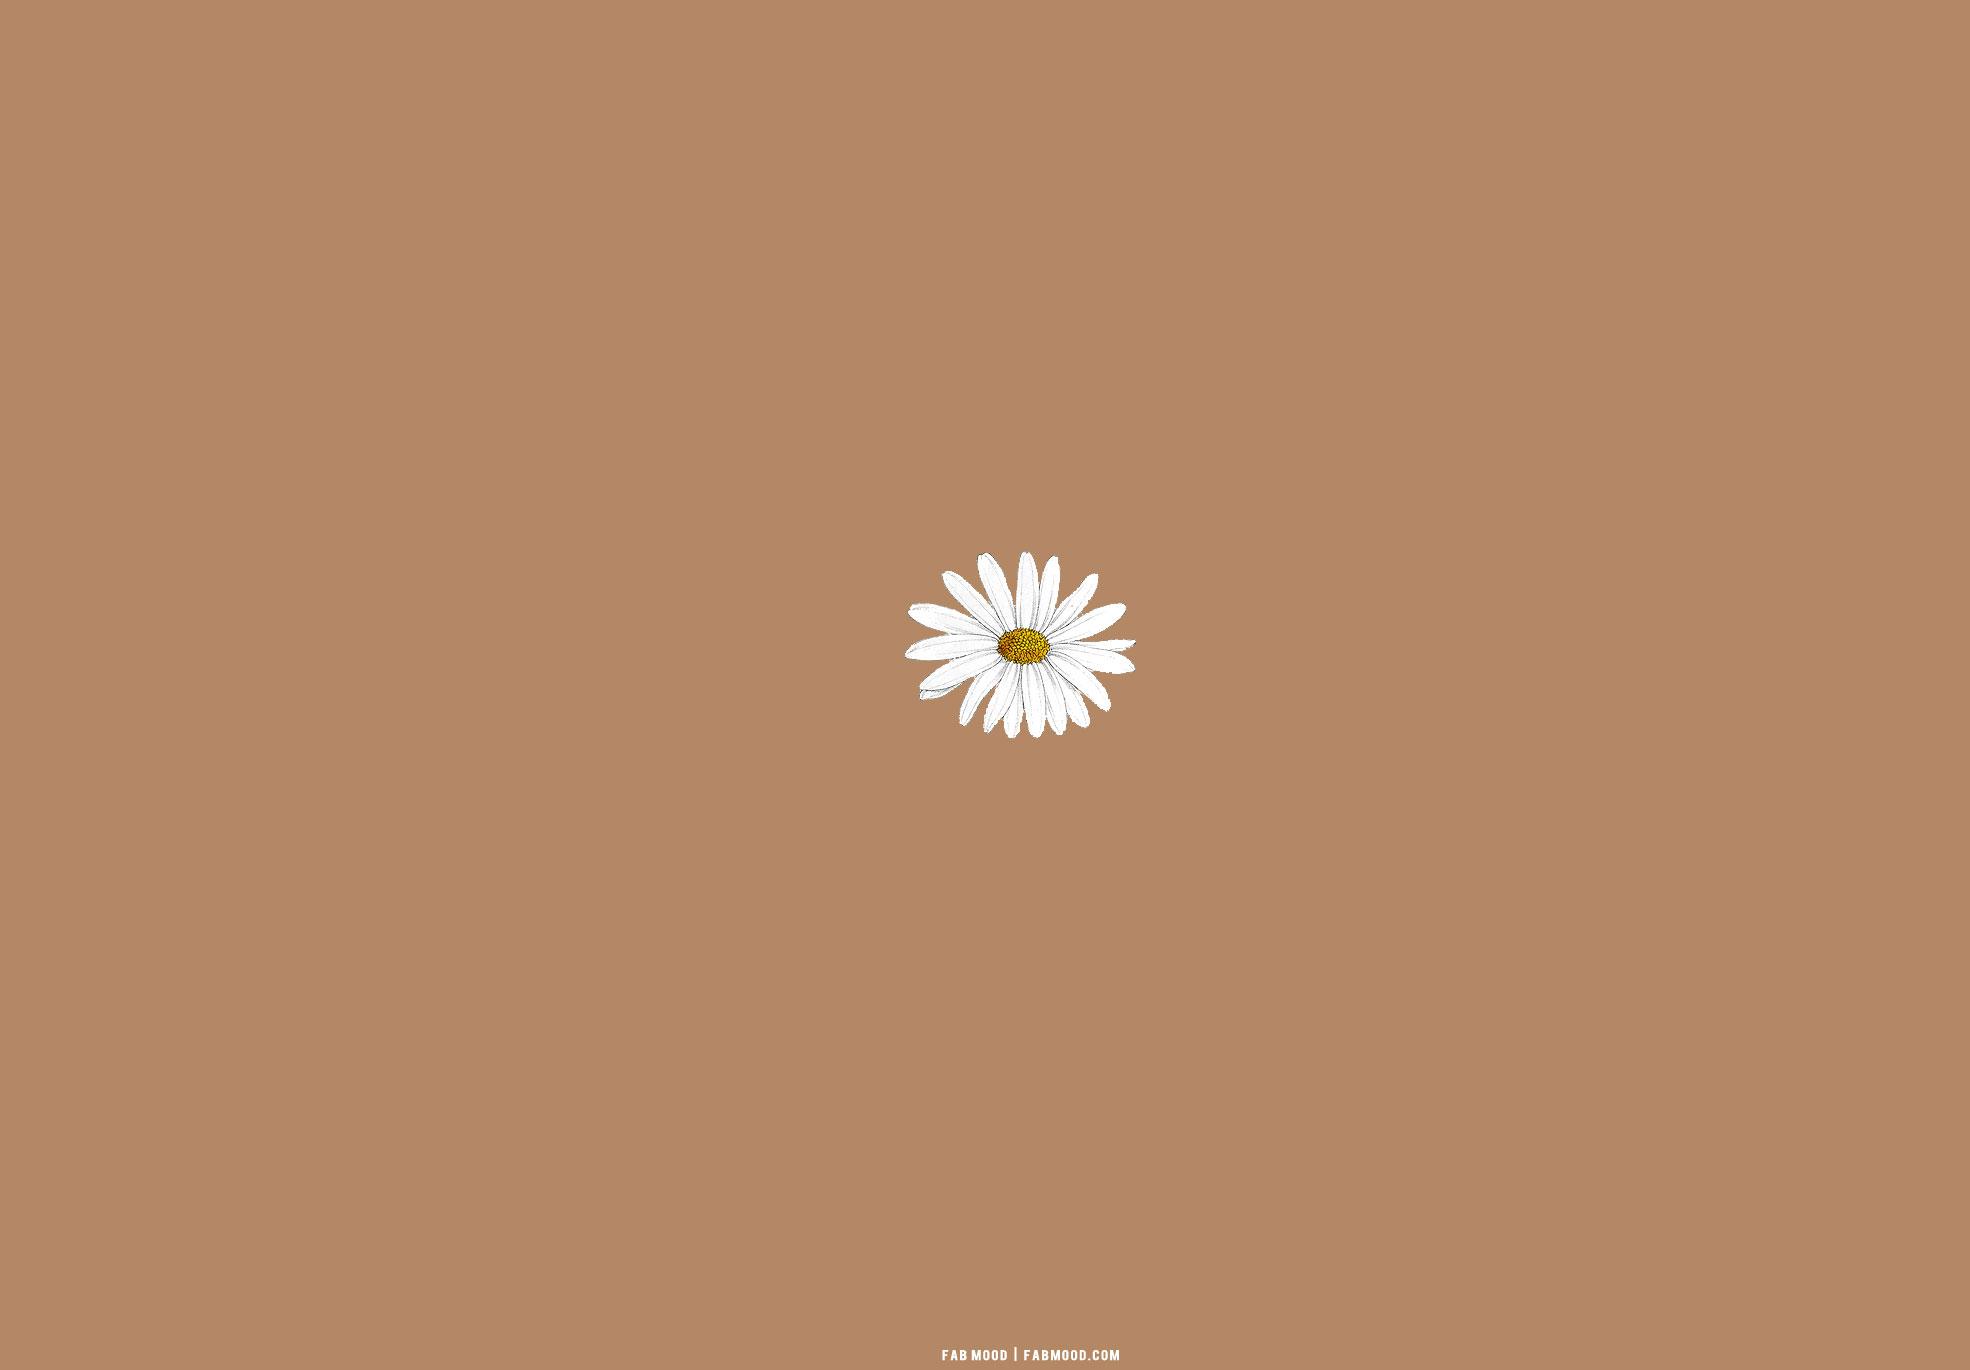  Brown Aesthetic Wallpaper for Laptop Daisy Fab Mood